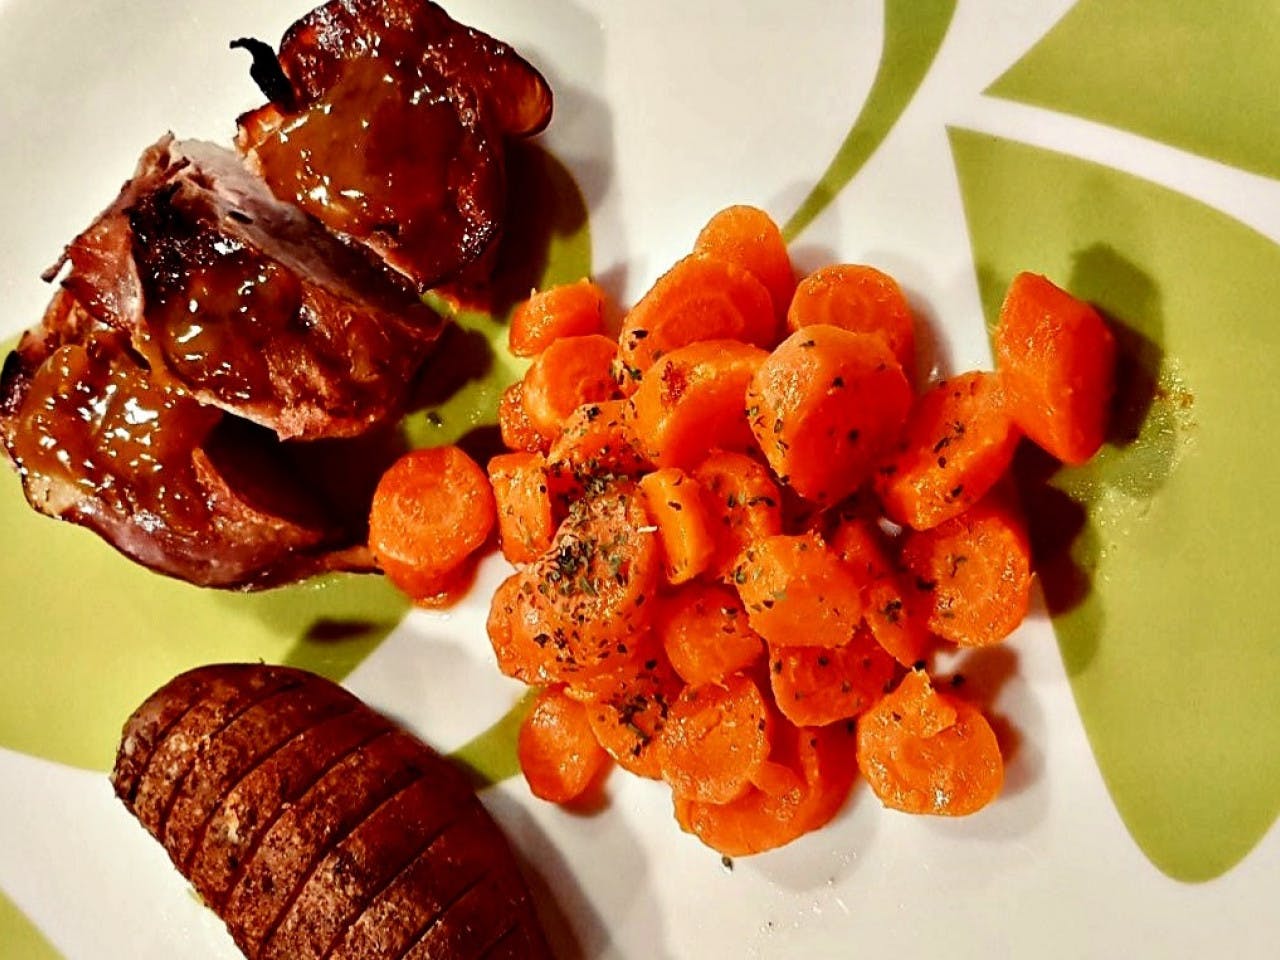 Pork tenderloin with candied carrots and sweet potato